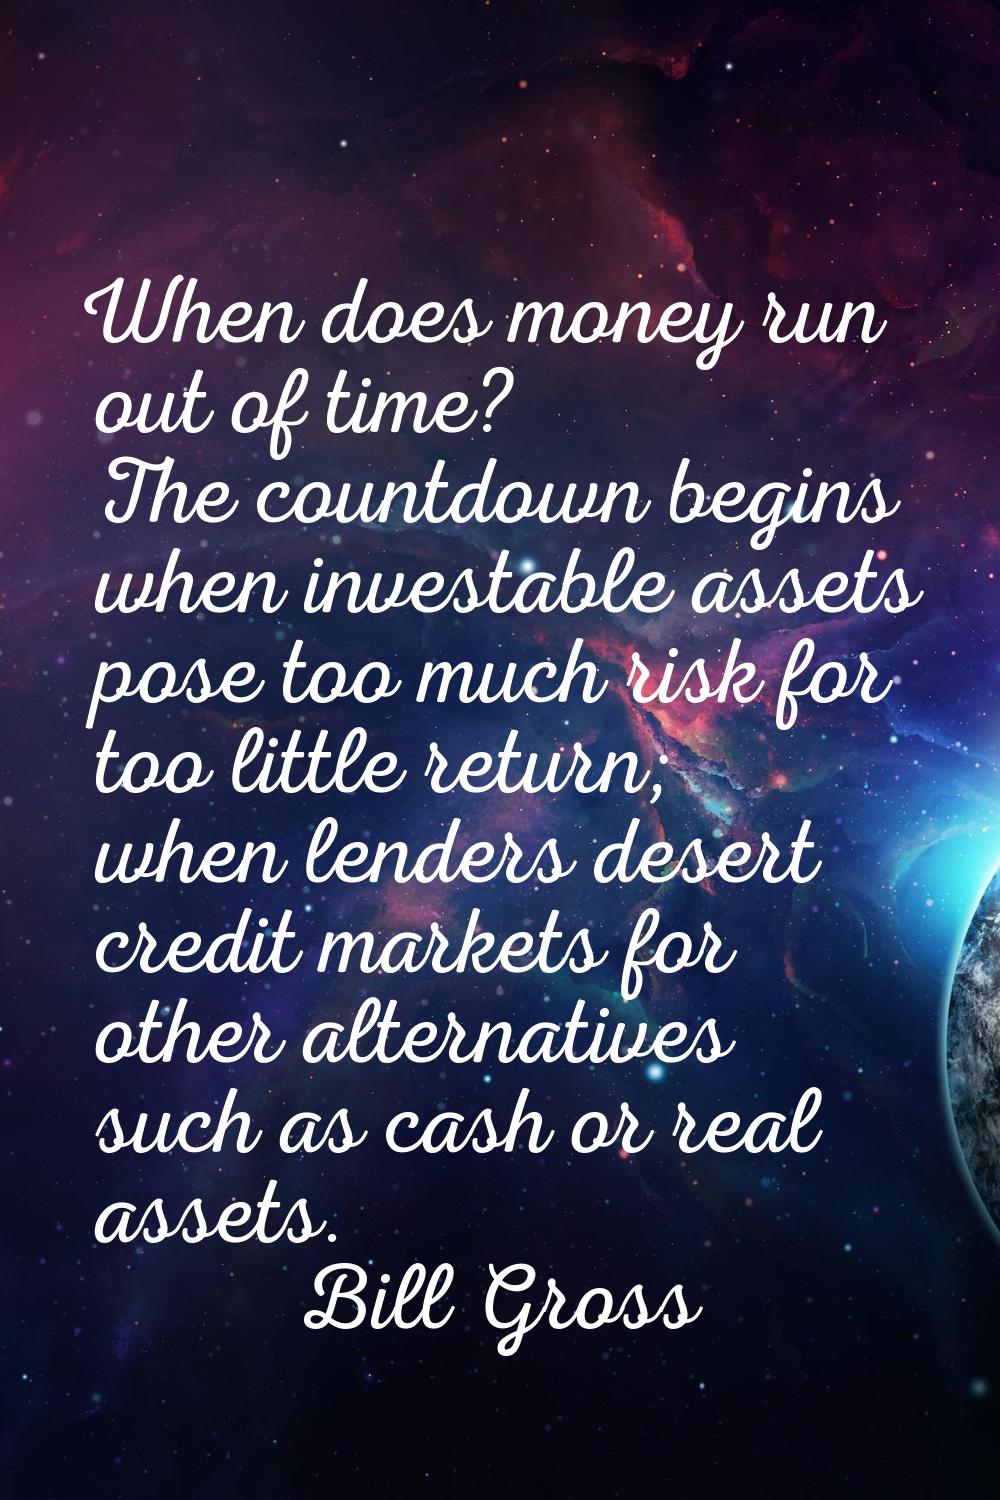 When does money run out of time? The countdown begins when investable assets pose too much risk for